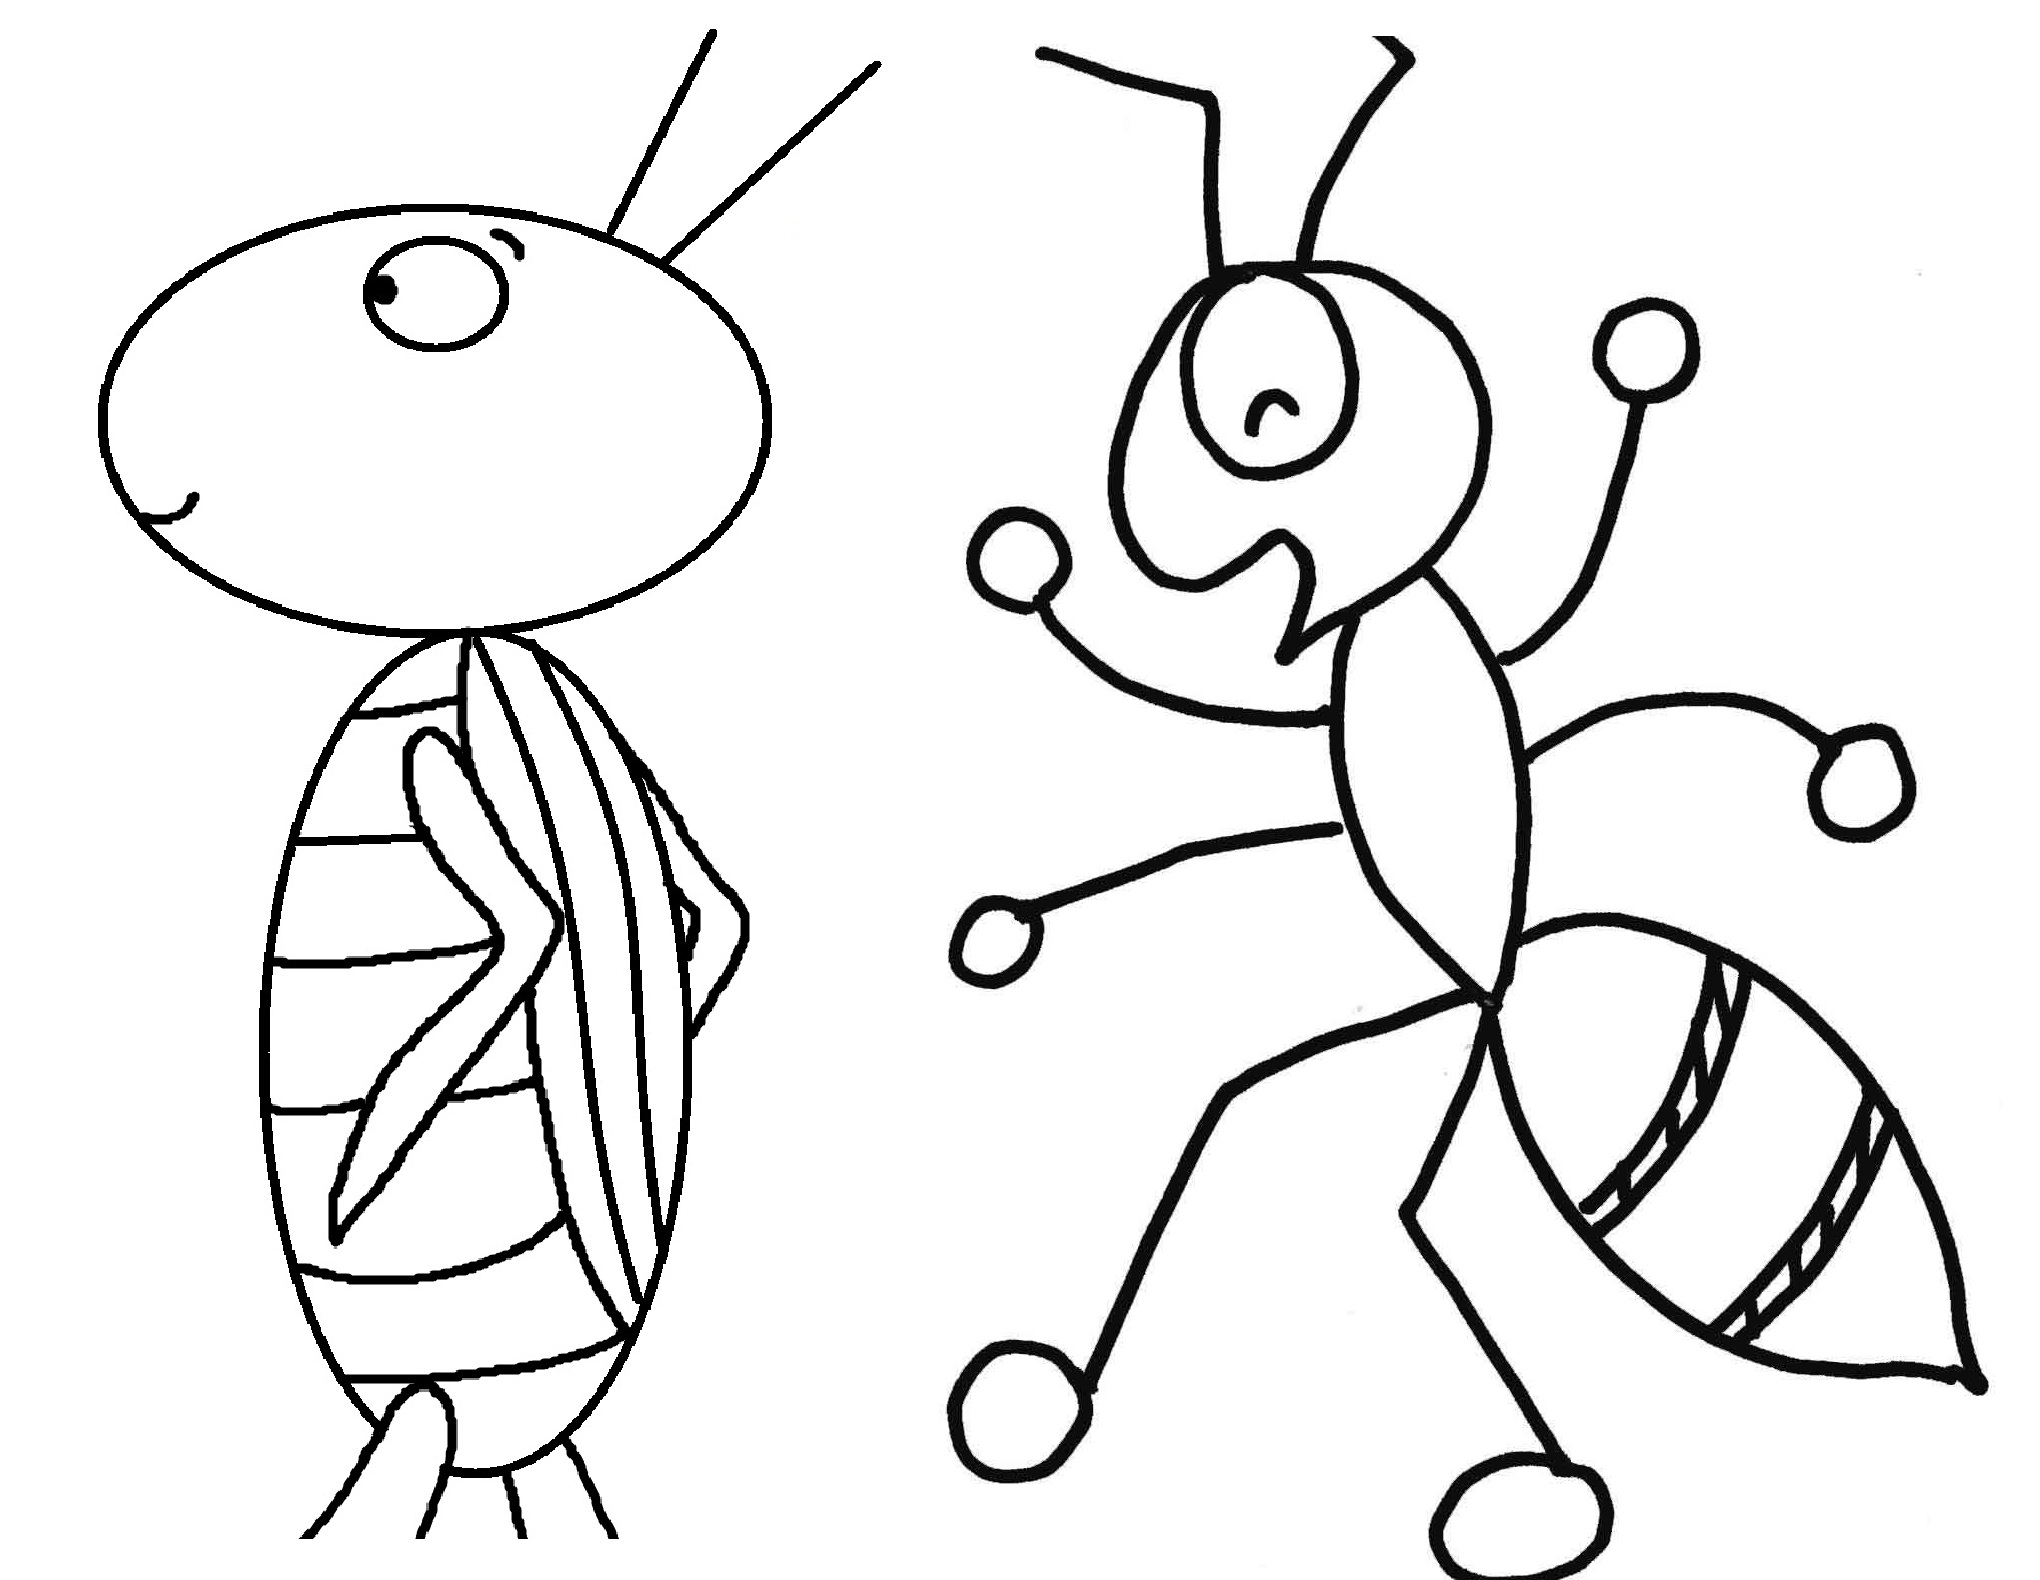 New page collection printable. Ant clipart coloring